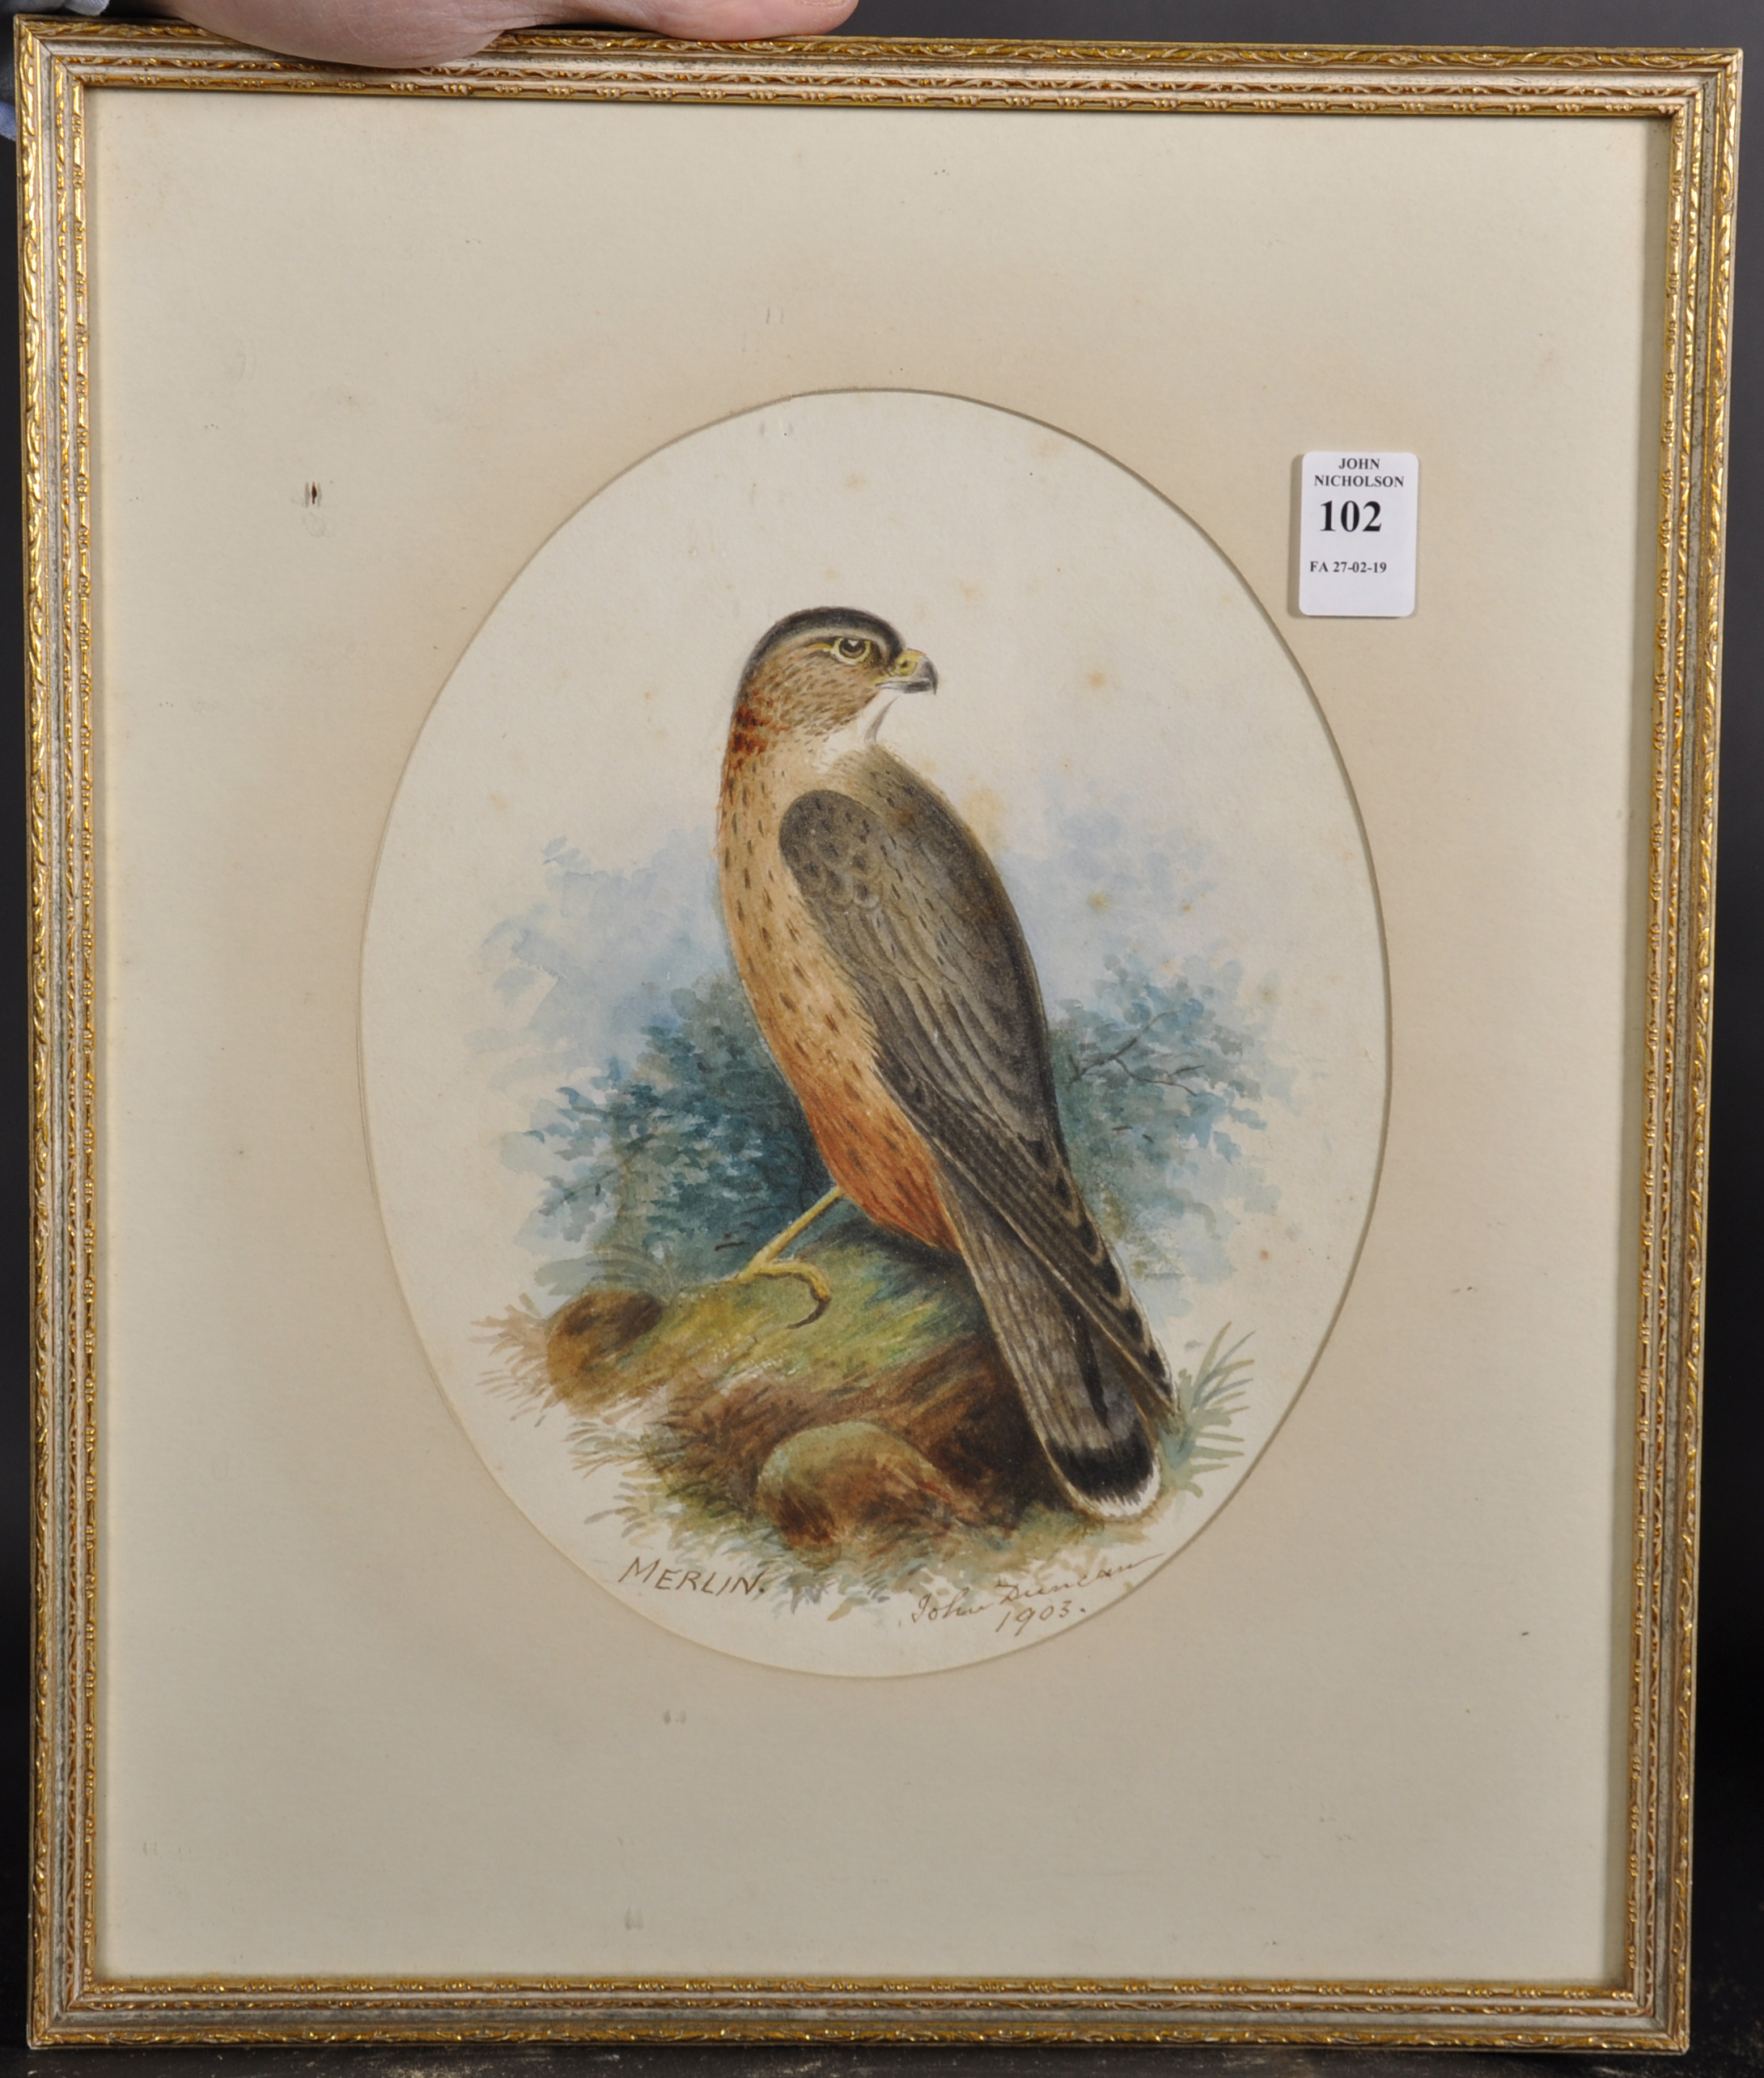 John Duncan (19th-20th Century) British. "Merlin", Study of a Bird of Prey, Watercolour, Signed, - Image 2 of 4